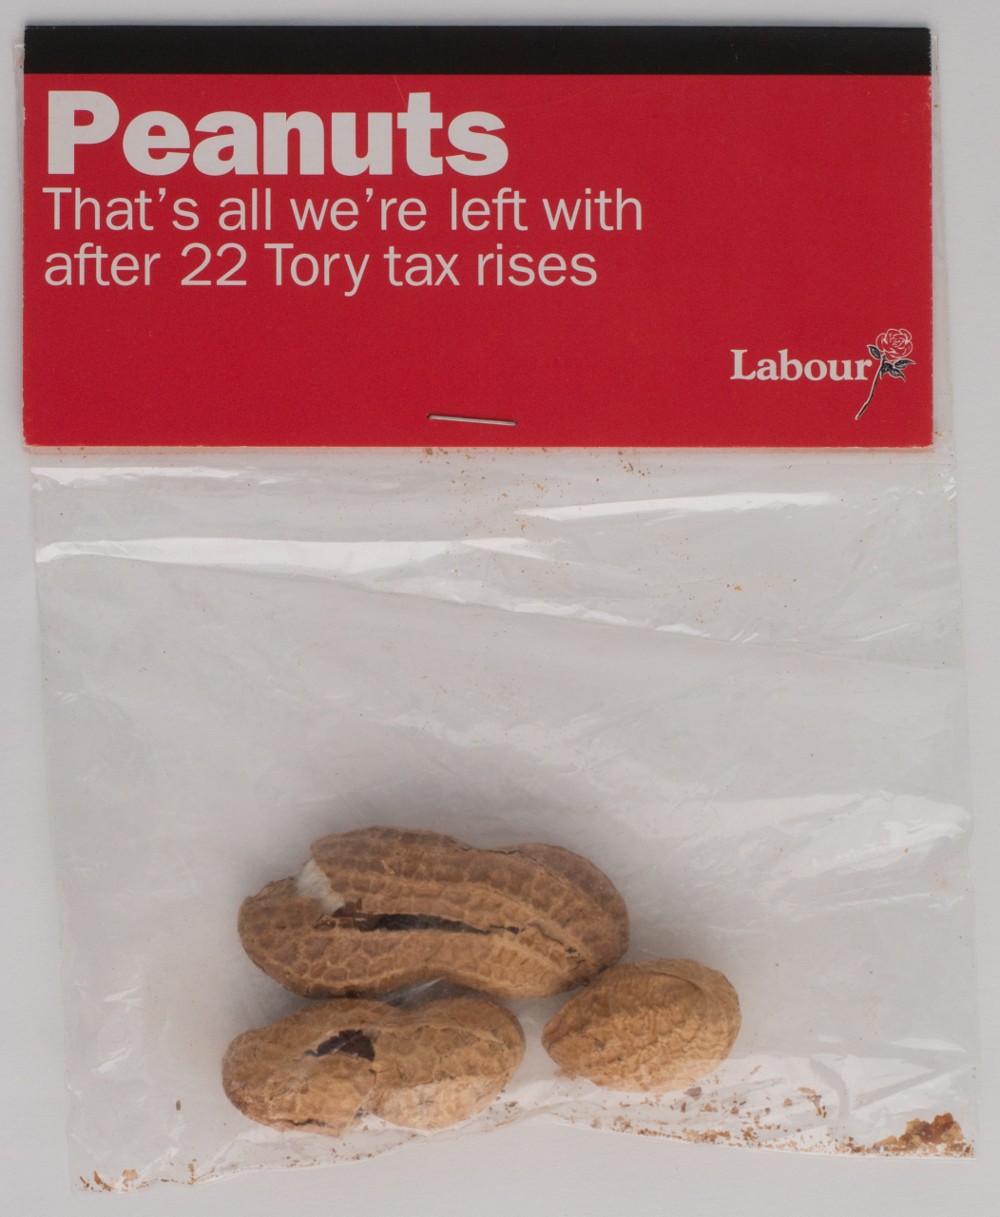 A bag of peanuts. The label is in Labour red and reads: "Peanuts. That's all we're left with after 22 Tory tax rises".